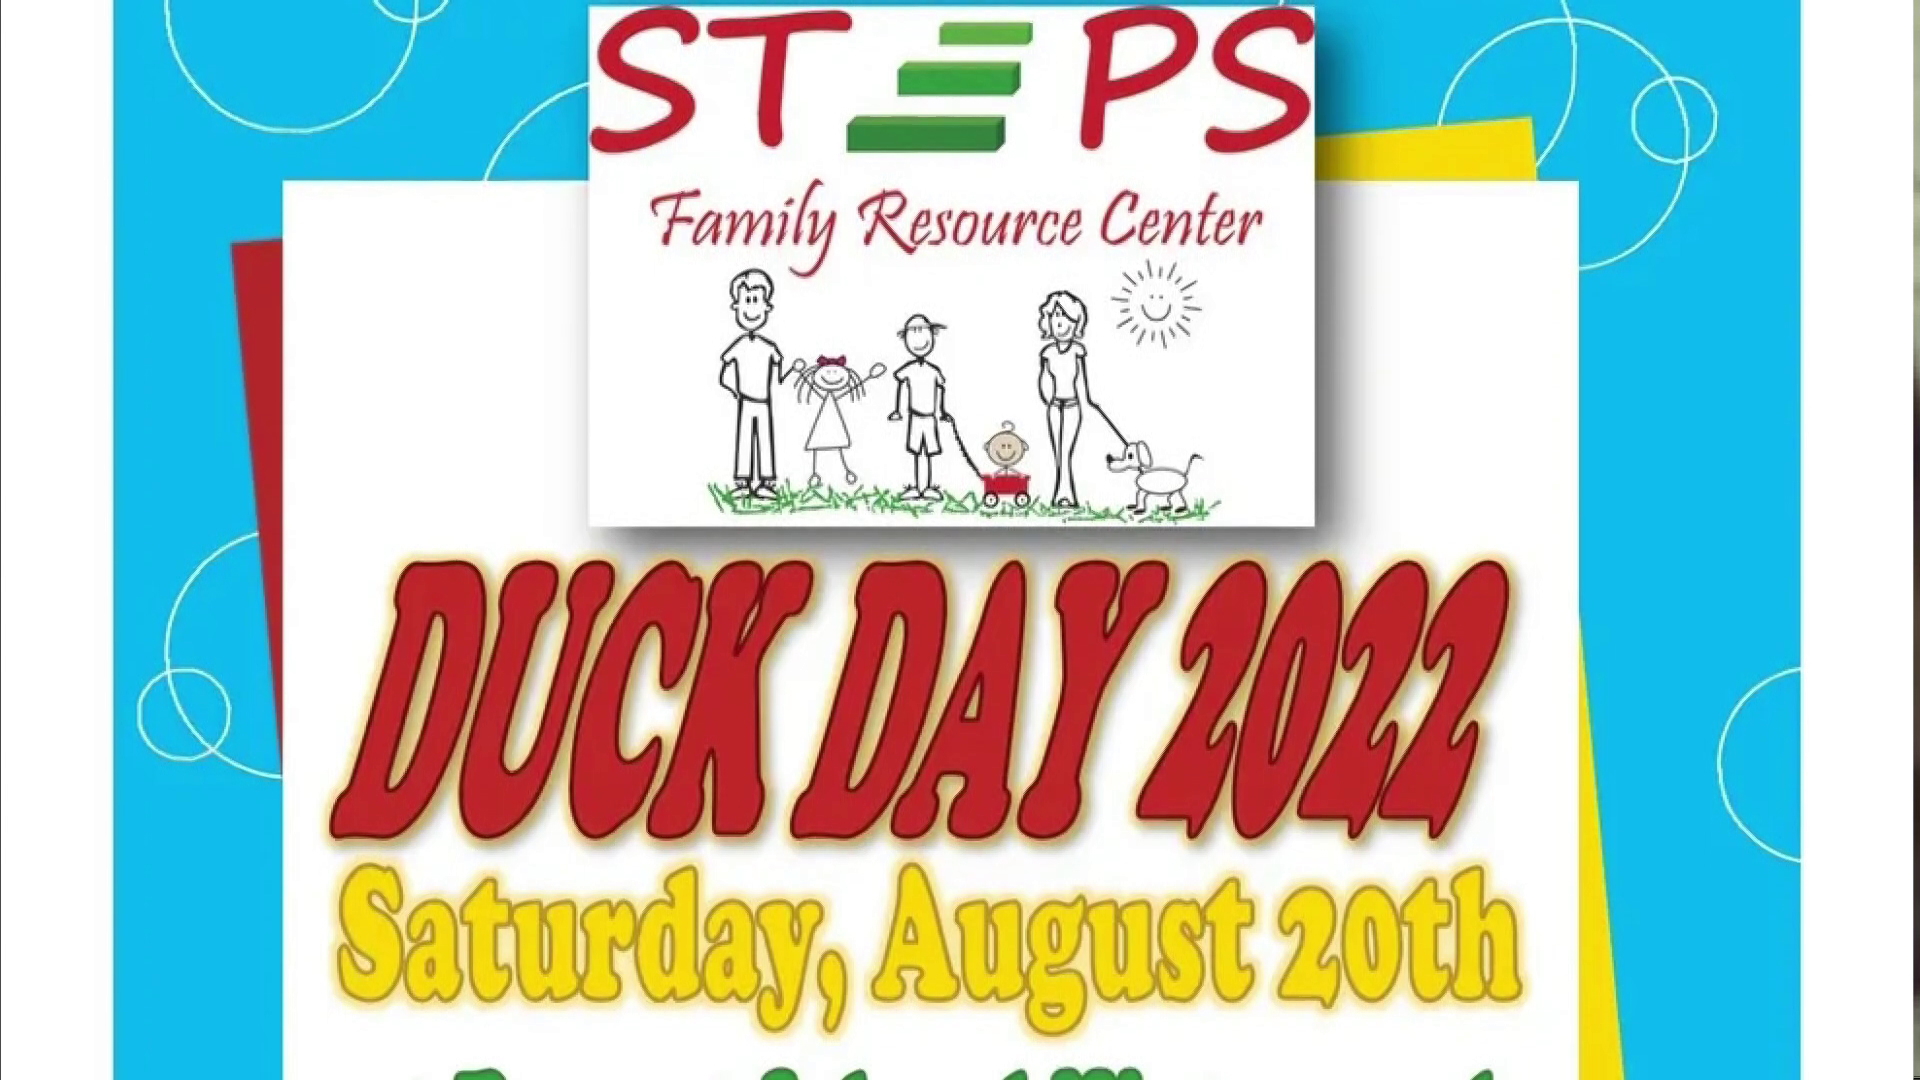 It'll be a day full of family fun and duck races to benefit the STEPS program.  Daren talks with Jenny Hunt and Karmella Montgomery about STEPS and the derby.